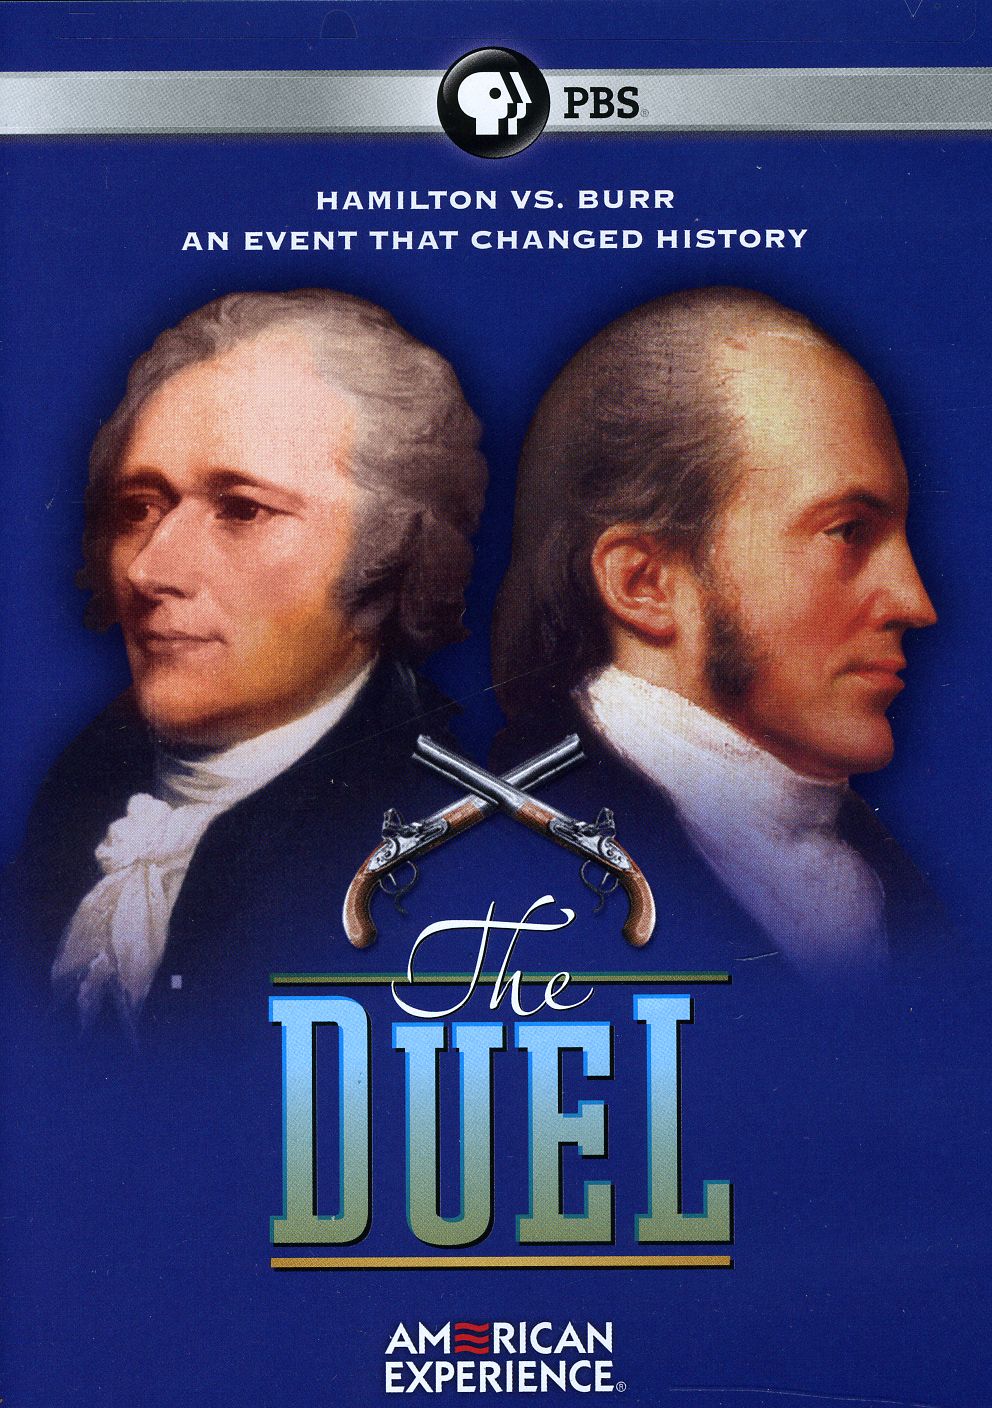 AMERICAN EXPERIENCE: THE DUEL